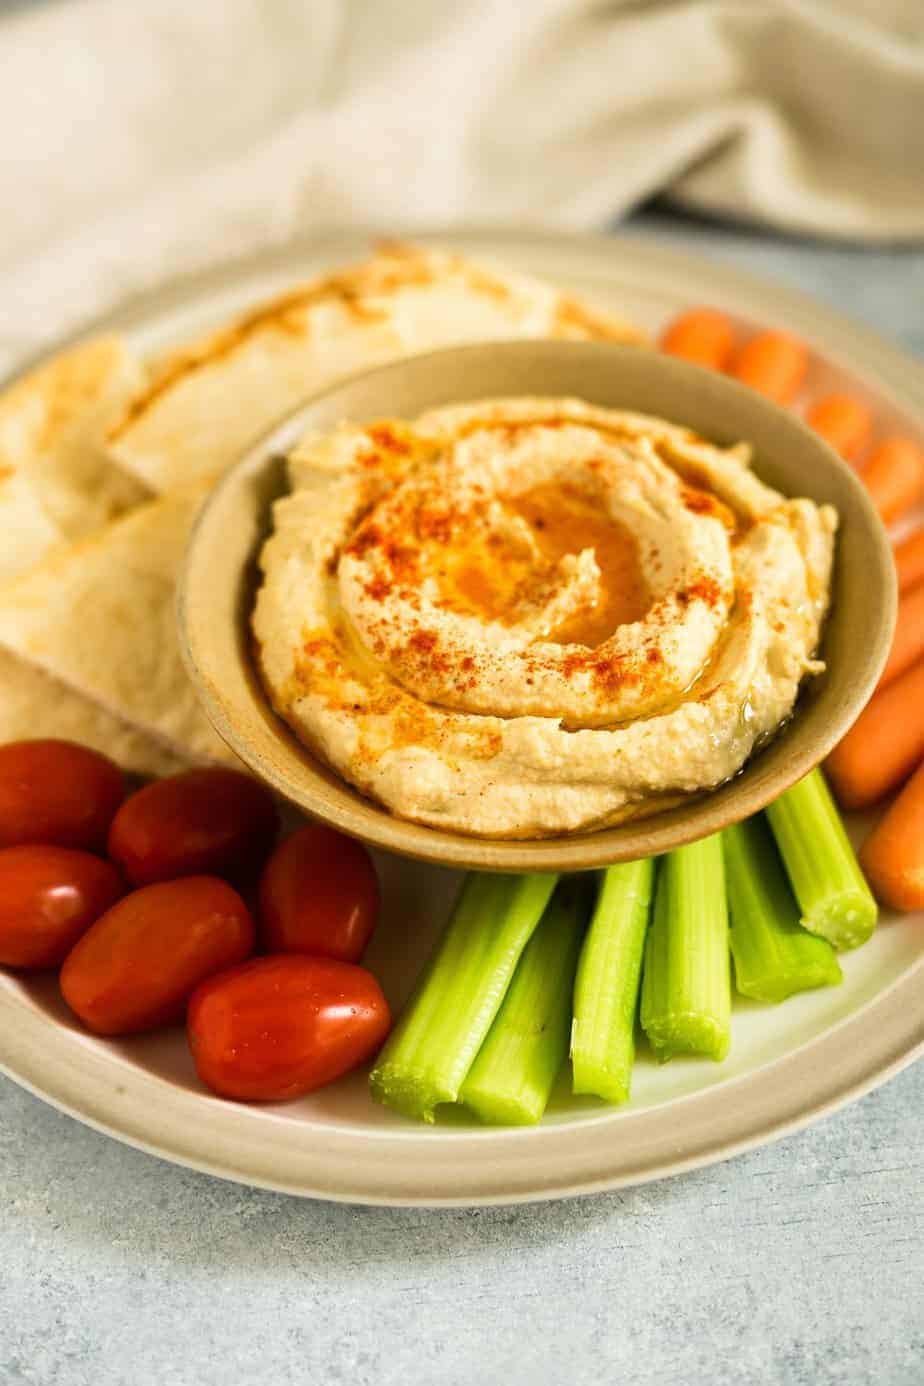 Pressure cooker hummus serve  in a bowl and a plate with veggies and pita bread.